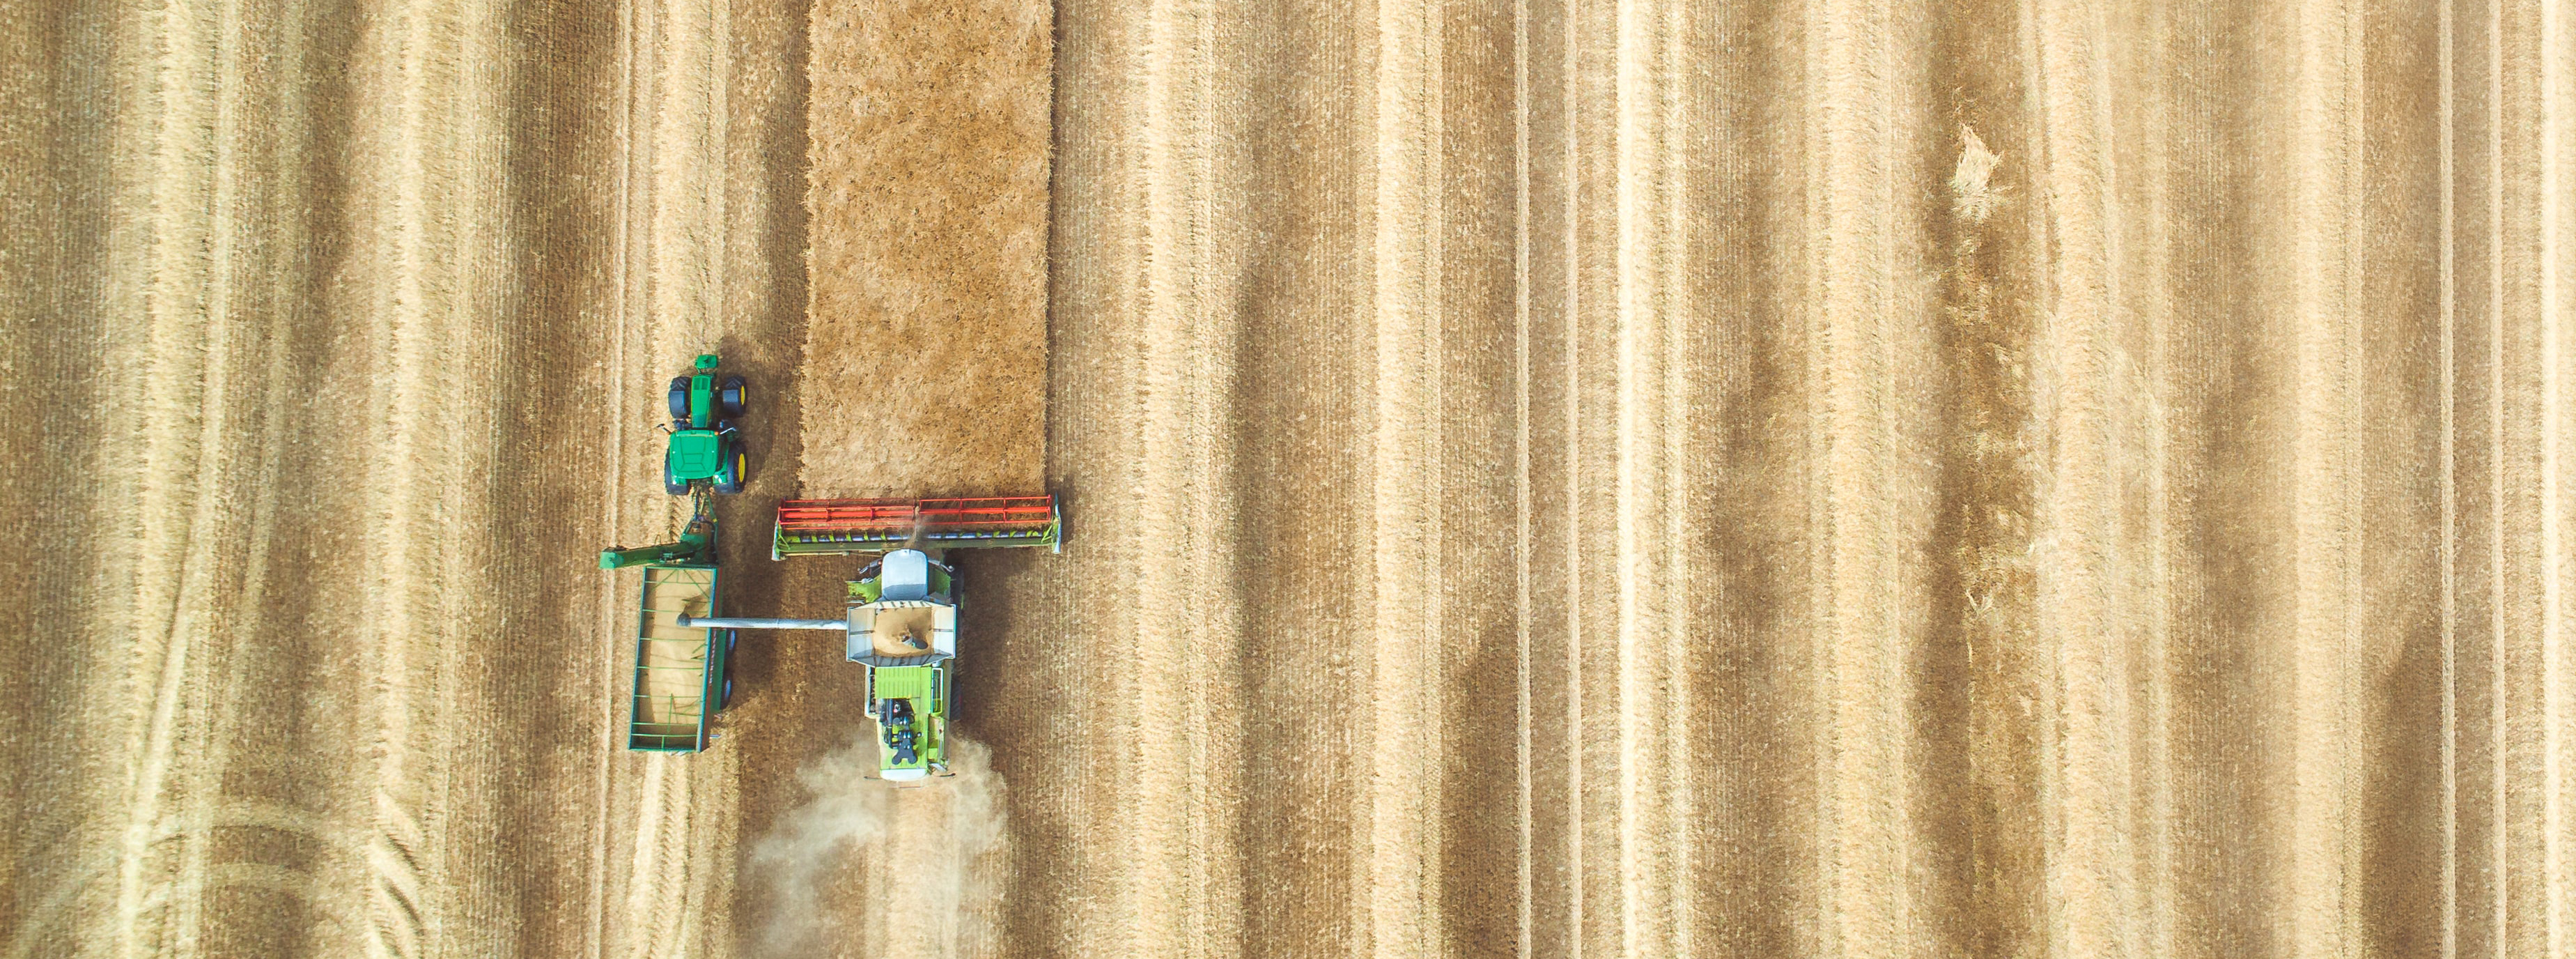 aerial image of a tractor harvesting a field